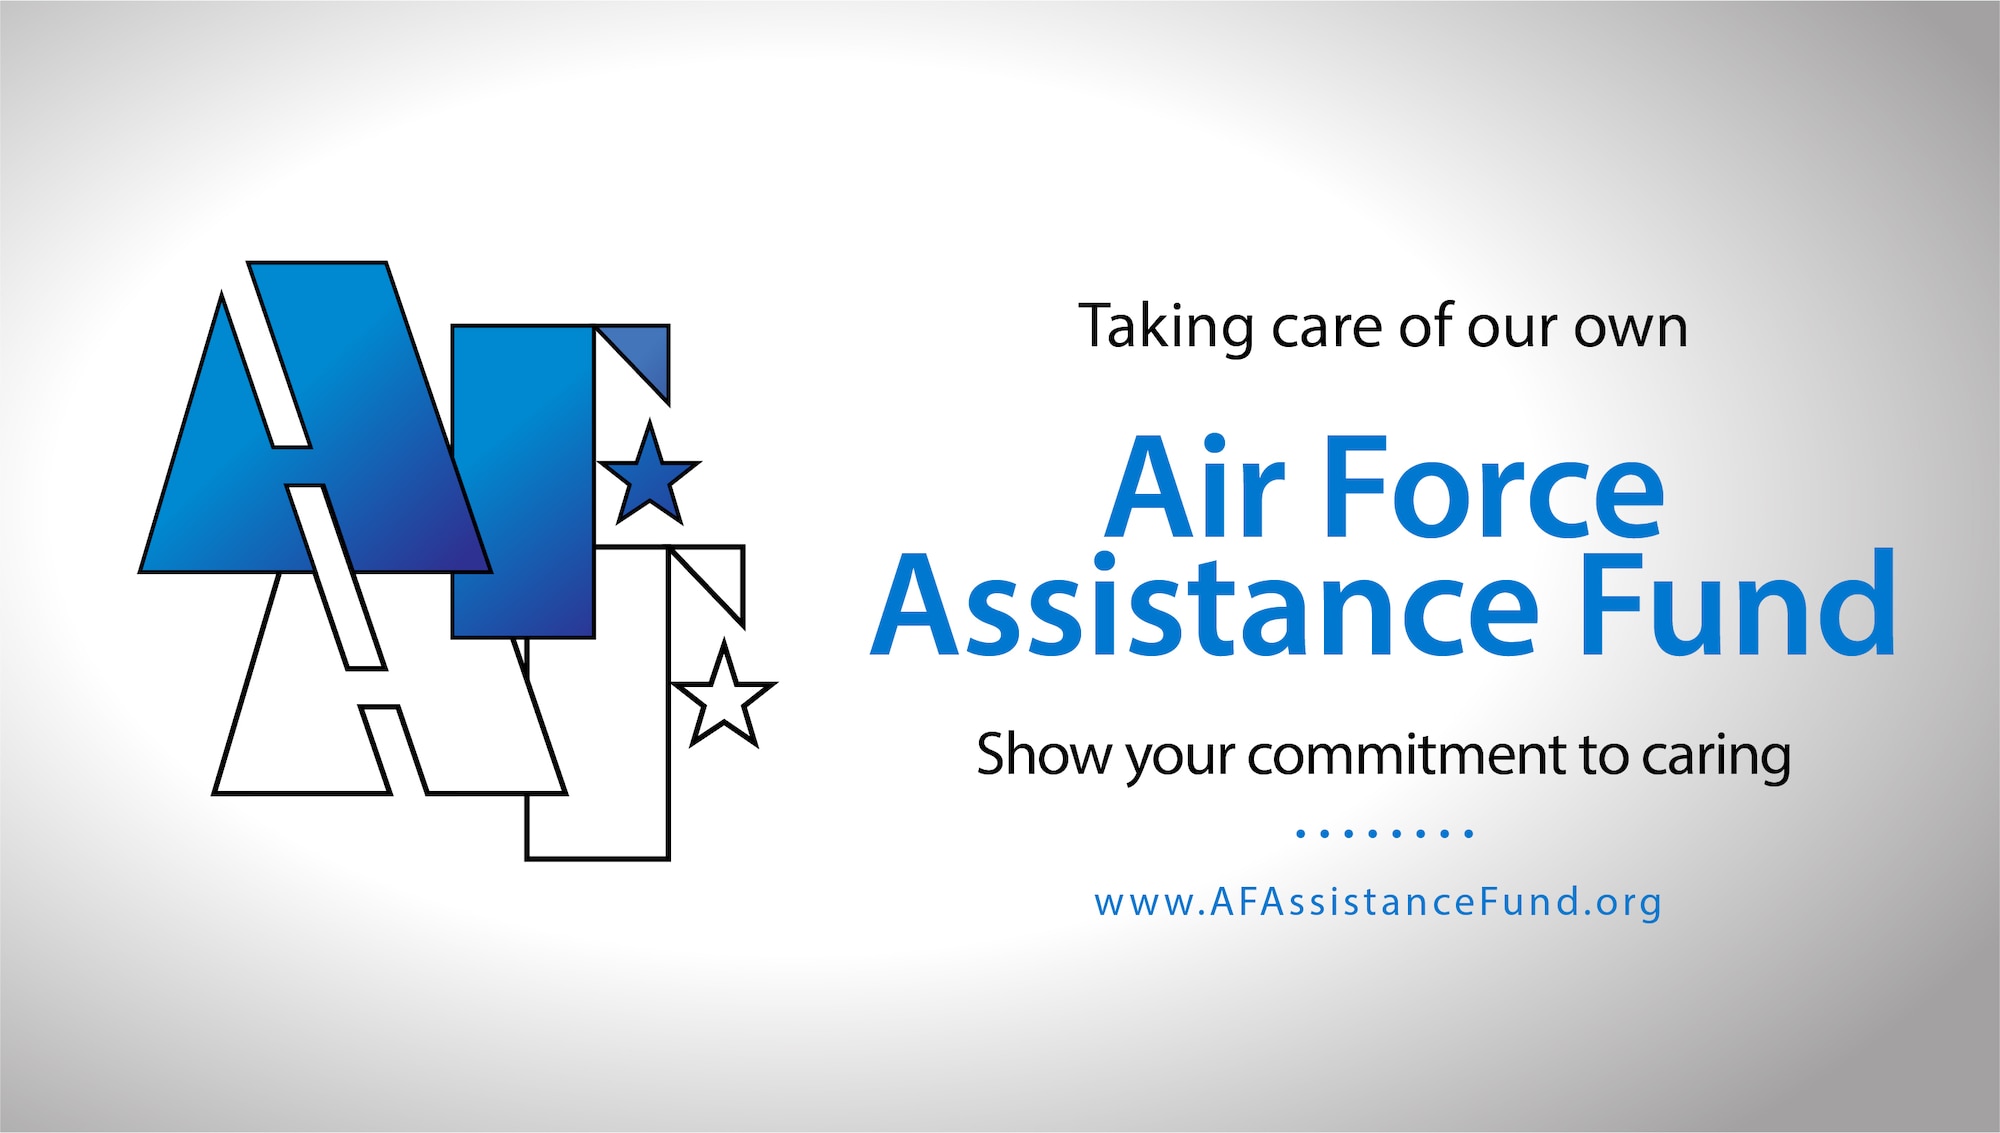 Air Force Assistance Fund campaigns raise funds for charities that provide support to Air Force families in need.